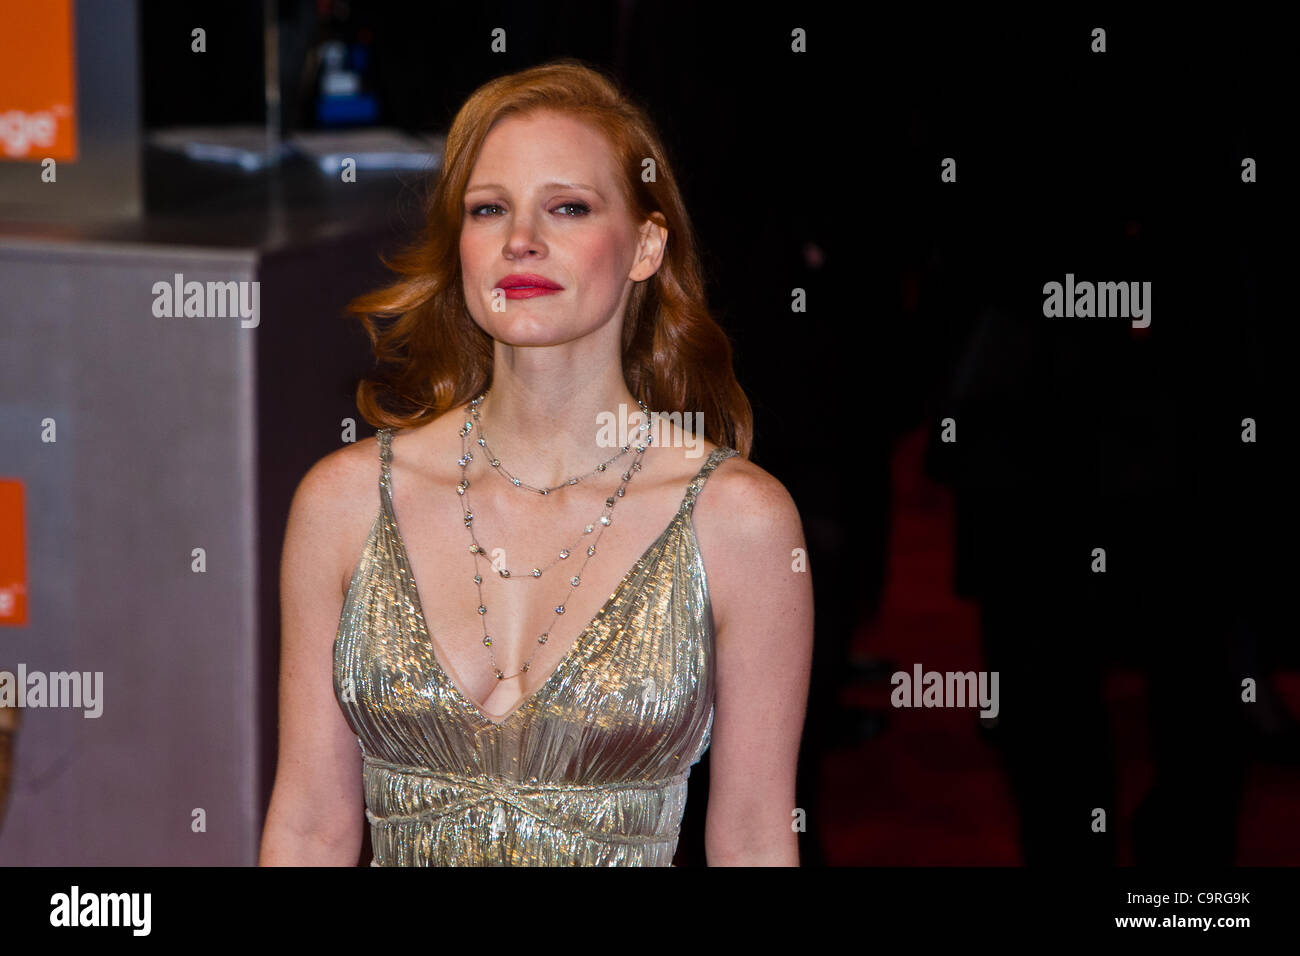 London, UK, 12/02/2012. Actress, Jessica Chastain, arriving on the red carpet to attend the 2012 BAFTAs Stock Photo